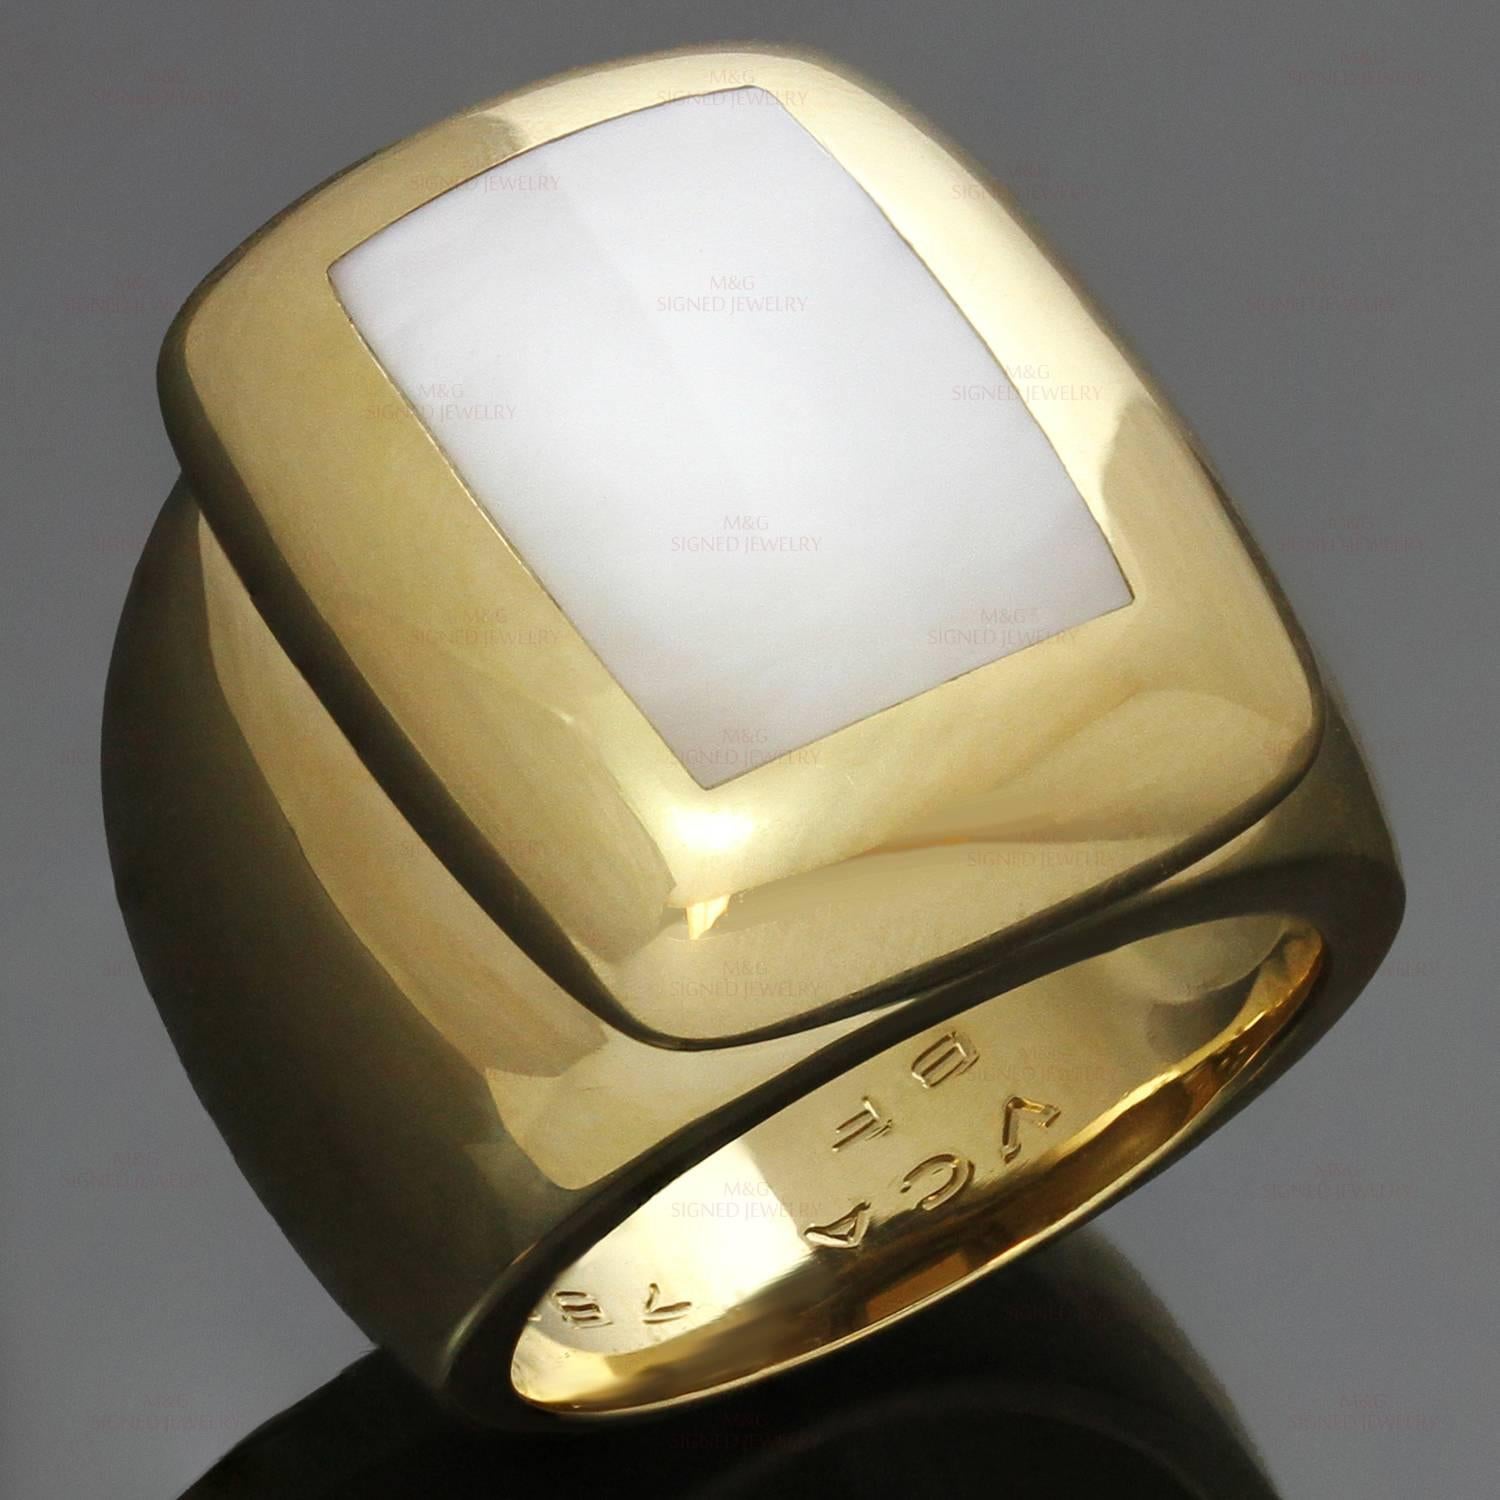 This chic Van Cleef & Arpels ring from the chic Babylon collection is crafted in 18k yellow gold and beautifully inlaid with mother-of-pearl. Made in France circa 2000s. Measurements: 0.86